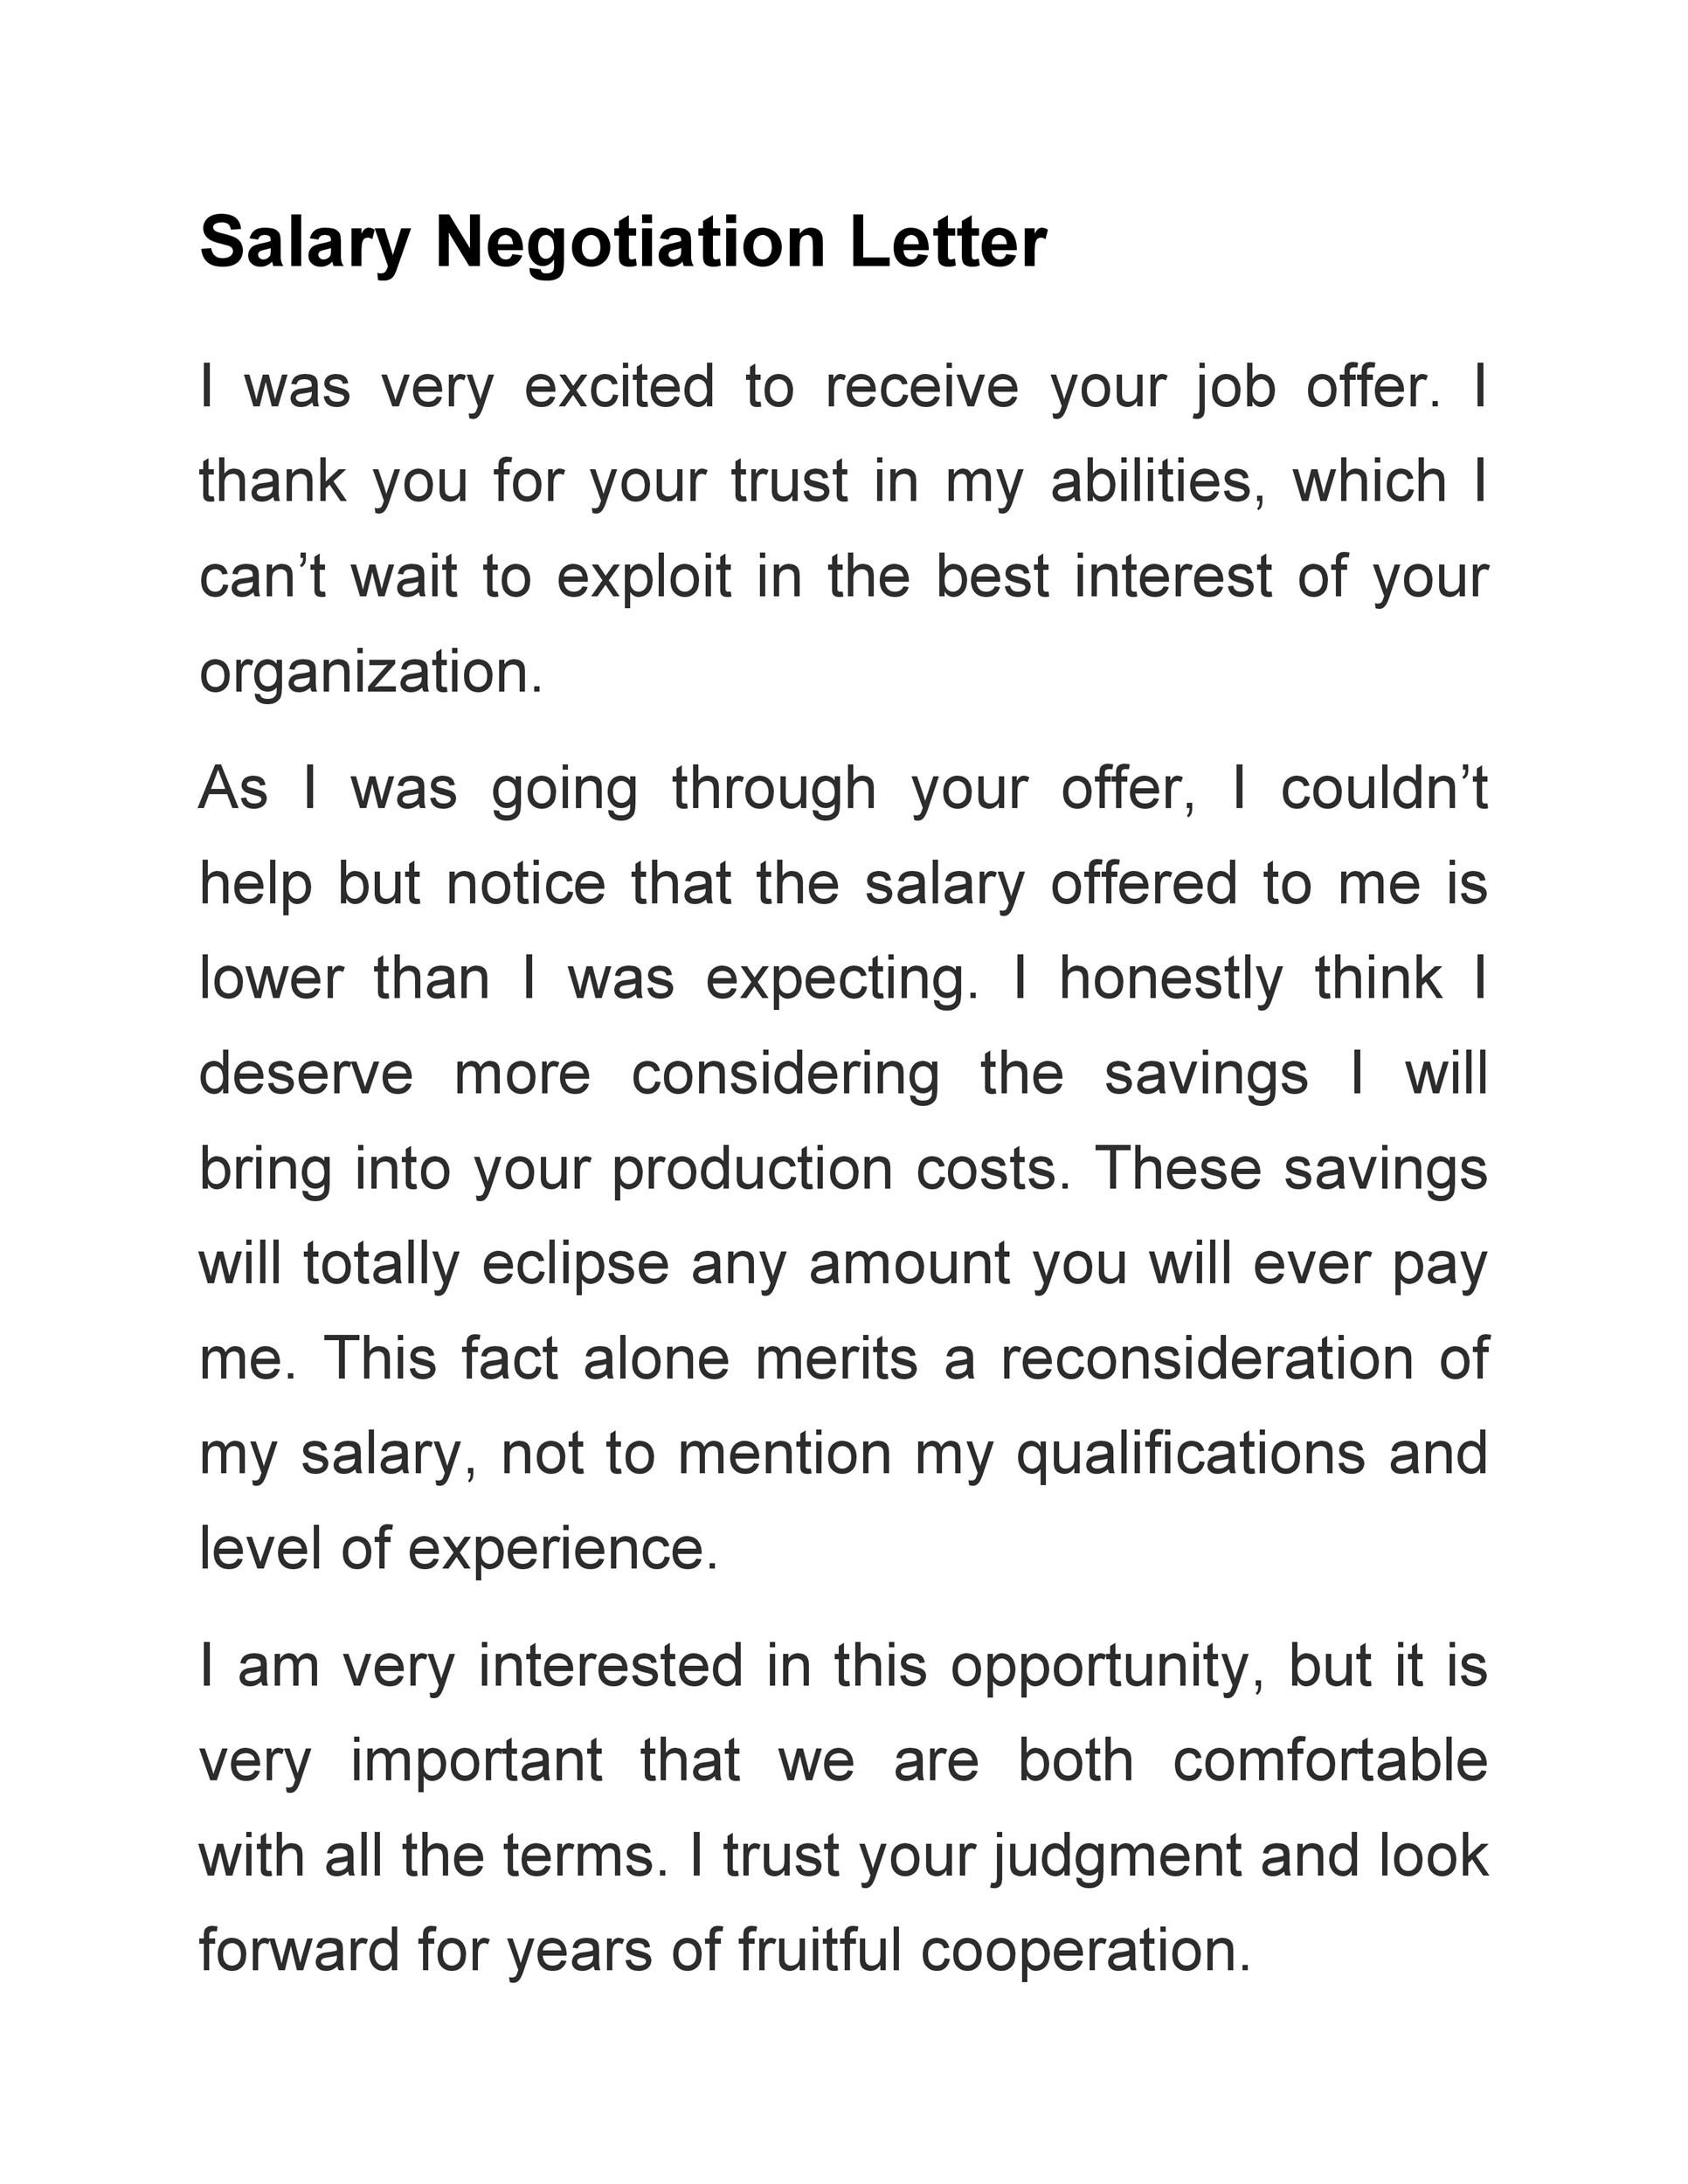 Free salary negotiation letter 22